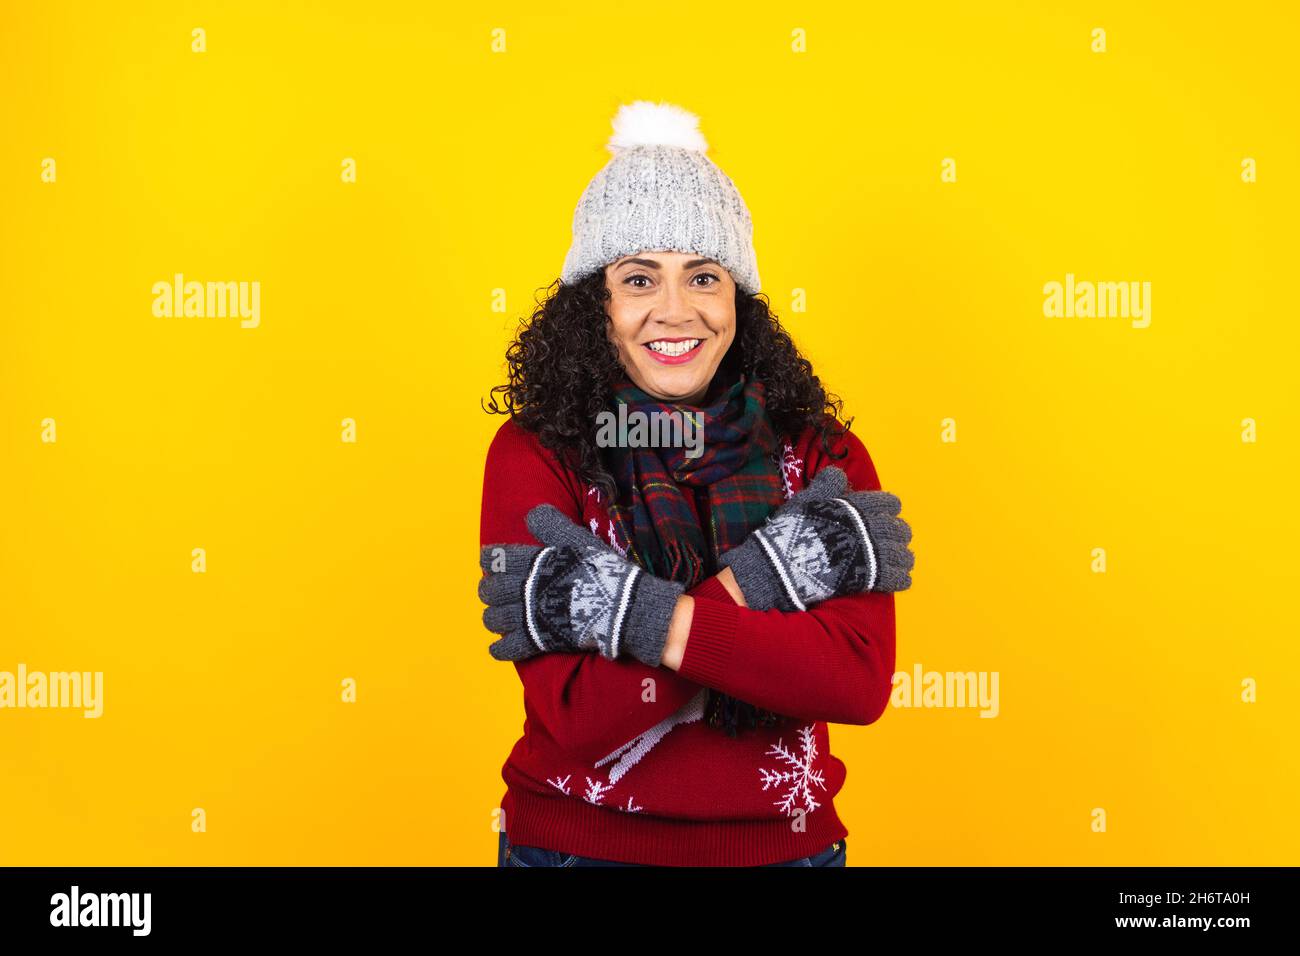 hispanic adult woman with frozen face and cold in winter sweater and warming up holding arms crossed on yellow background in Mexico Latin America Stock Photo